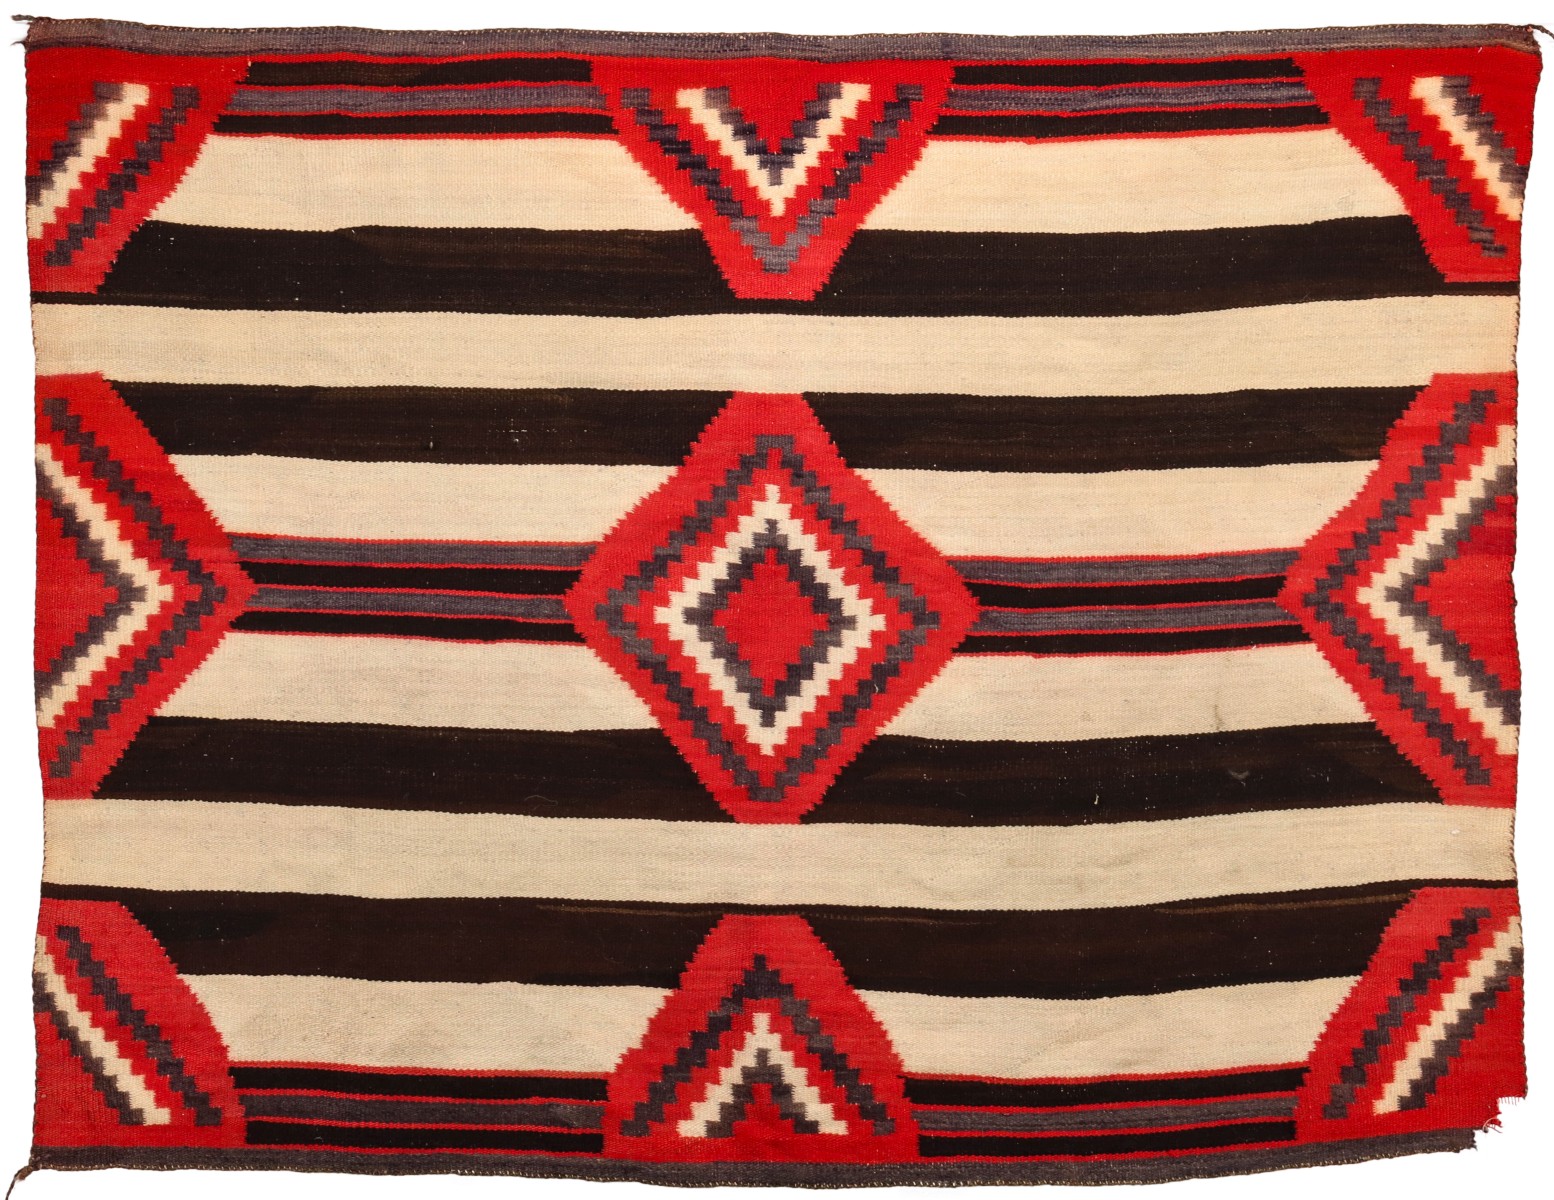 A NAVAJO LATE CLASSIC THIRD PHASE MAN'S BLANKET C. 1900